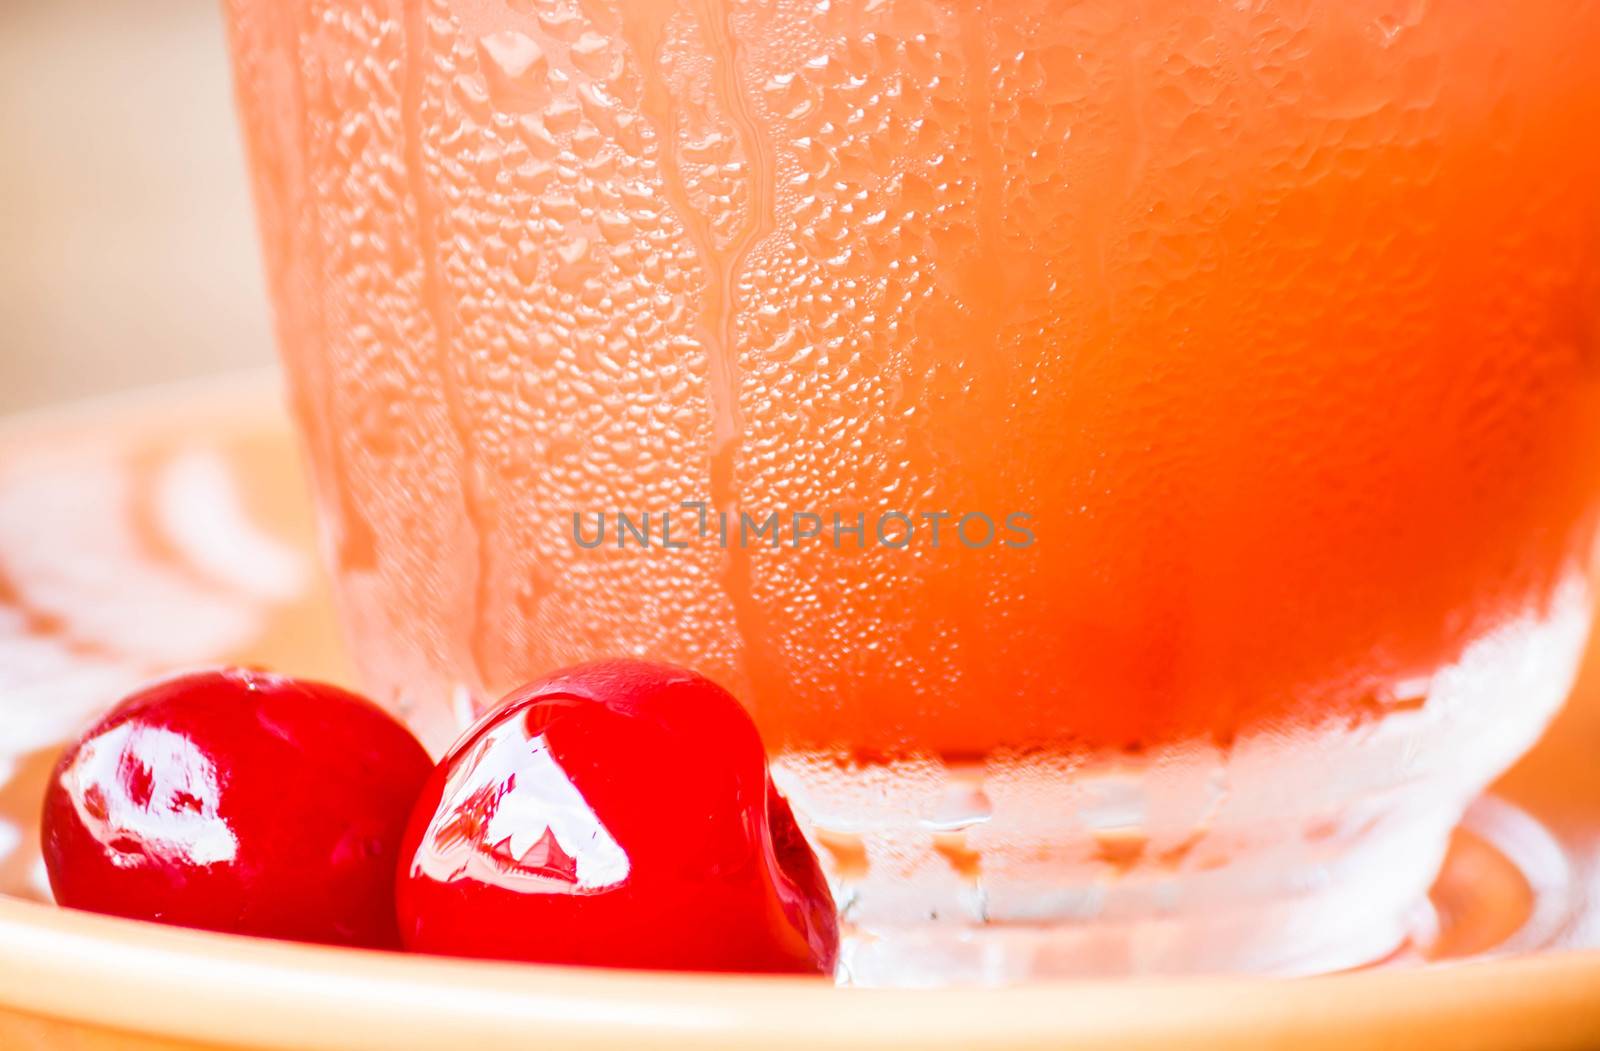 Red cherry decorate iced mix fruits juice by punsayaporn